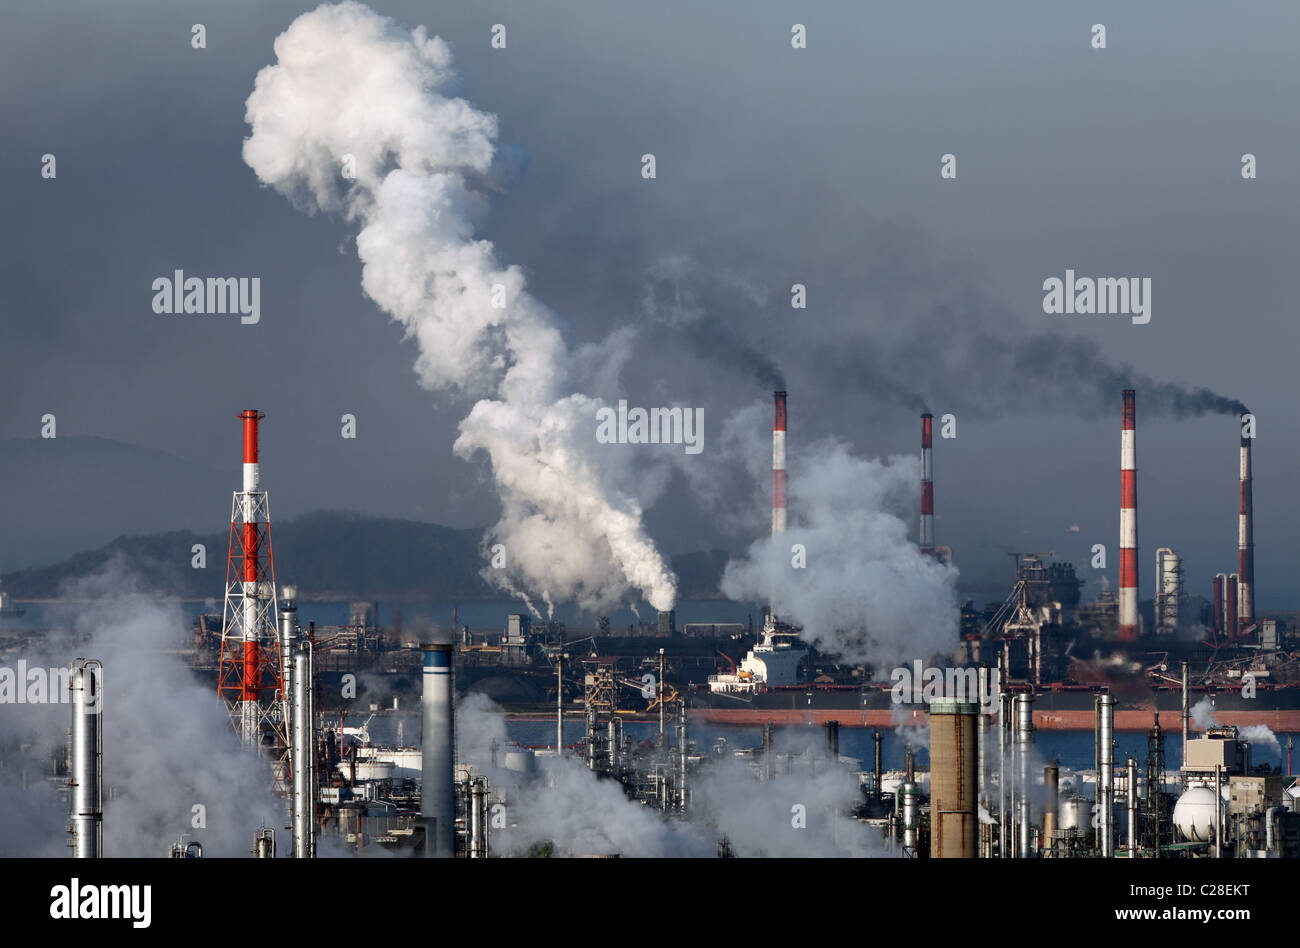 Industrial plant With Smoke Stacks, Industrial area Stock Photo